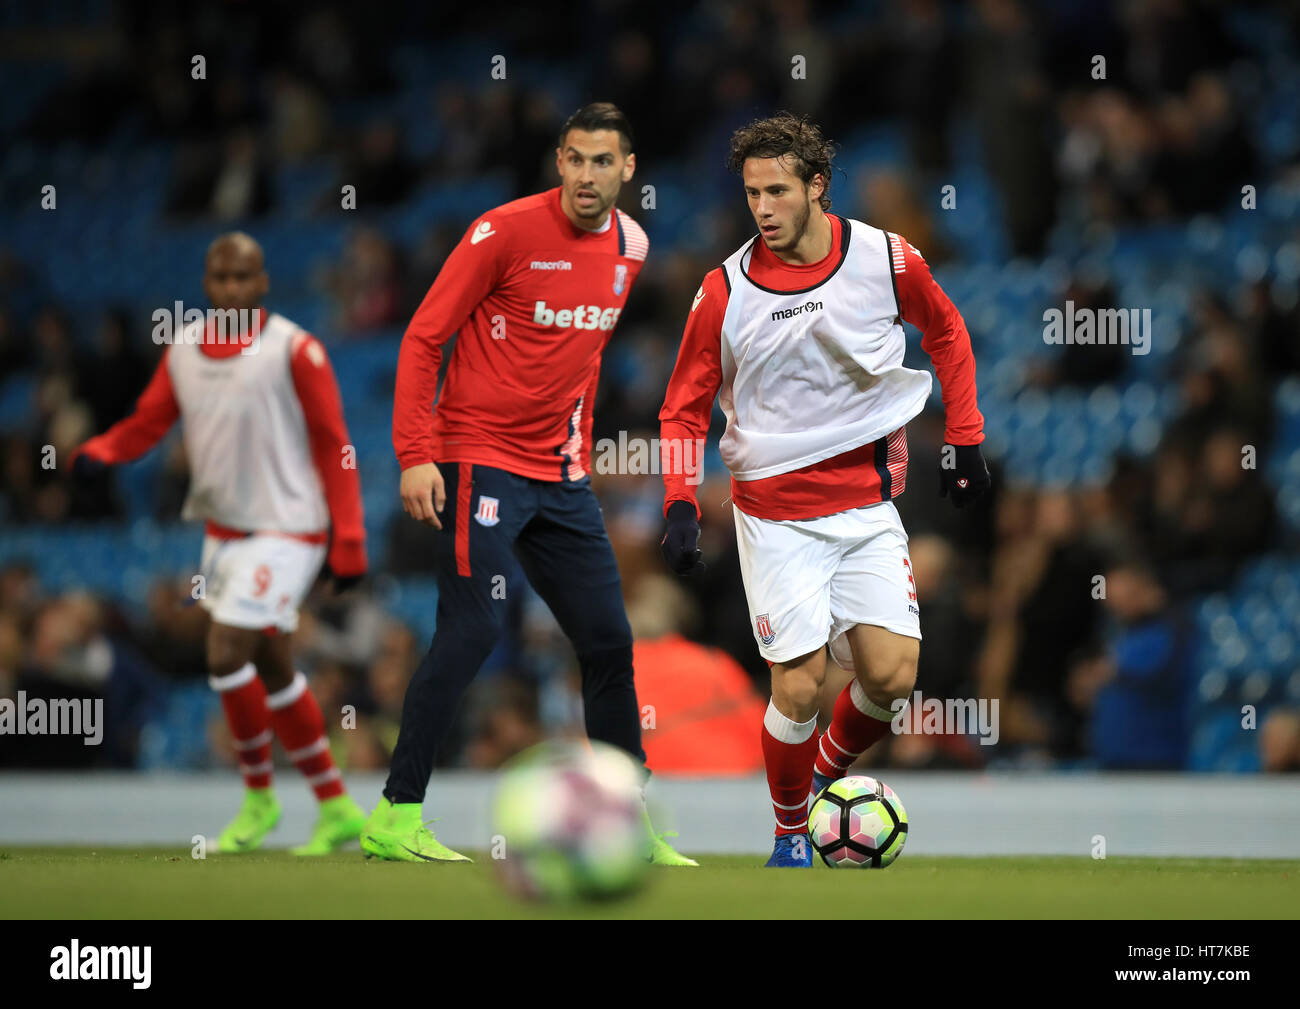 Stoke City's Ramadan Sobhi during the Premier League match at the Etihad Stadium, Manchester. PRESS ASSOCIATION Photo. Picture date: Wednesday March 8, 2017. See PA story SOCCER Man City. Photo credit should read: Mike Egerton/PA Wire. RESTRICTIONS: EDITORIAL USE ONLY No use with unauthorised audio, video, data, fixture lists, club/league logos or 'live' services. Online in-match use limited to 75 images, no video emulation. No use in betting, games or single club/league/player publications. Stock Photo